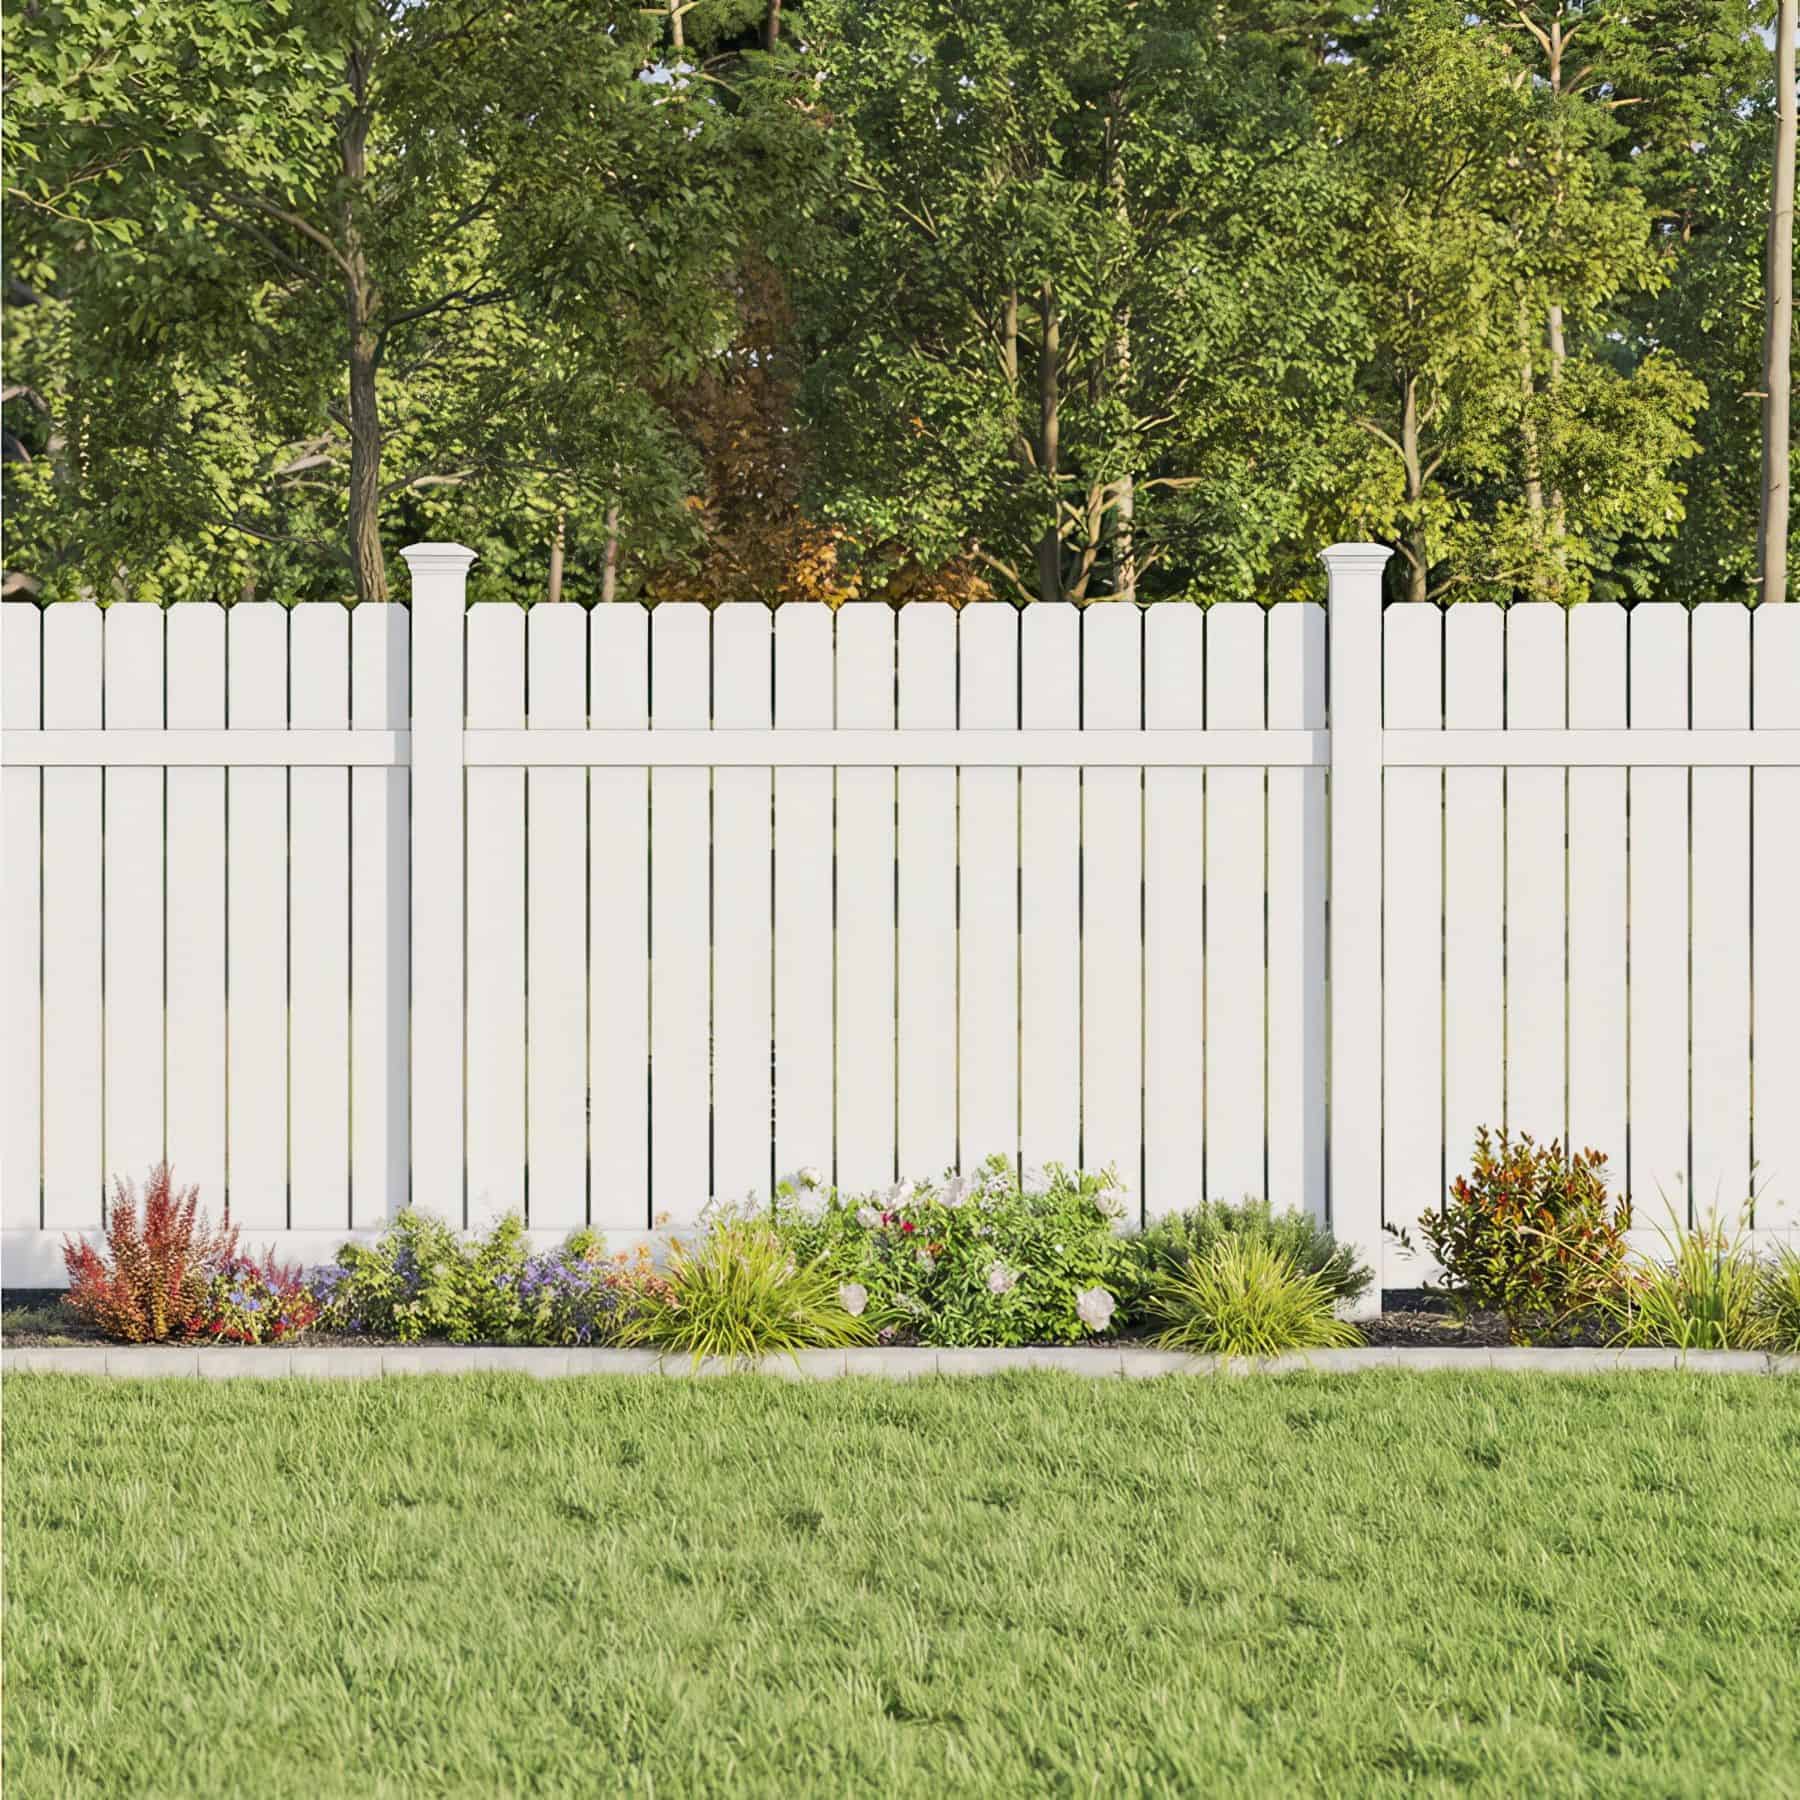 White, picket vinyl semi-privacy fence with small shrubs in front, separating the backyard garden from the forest.